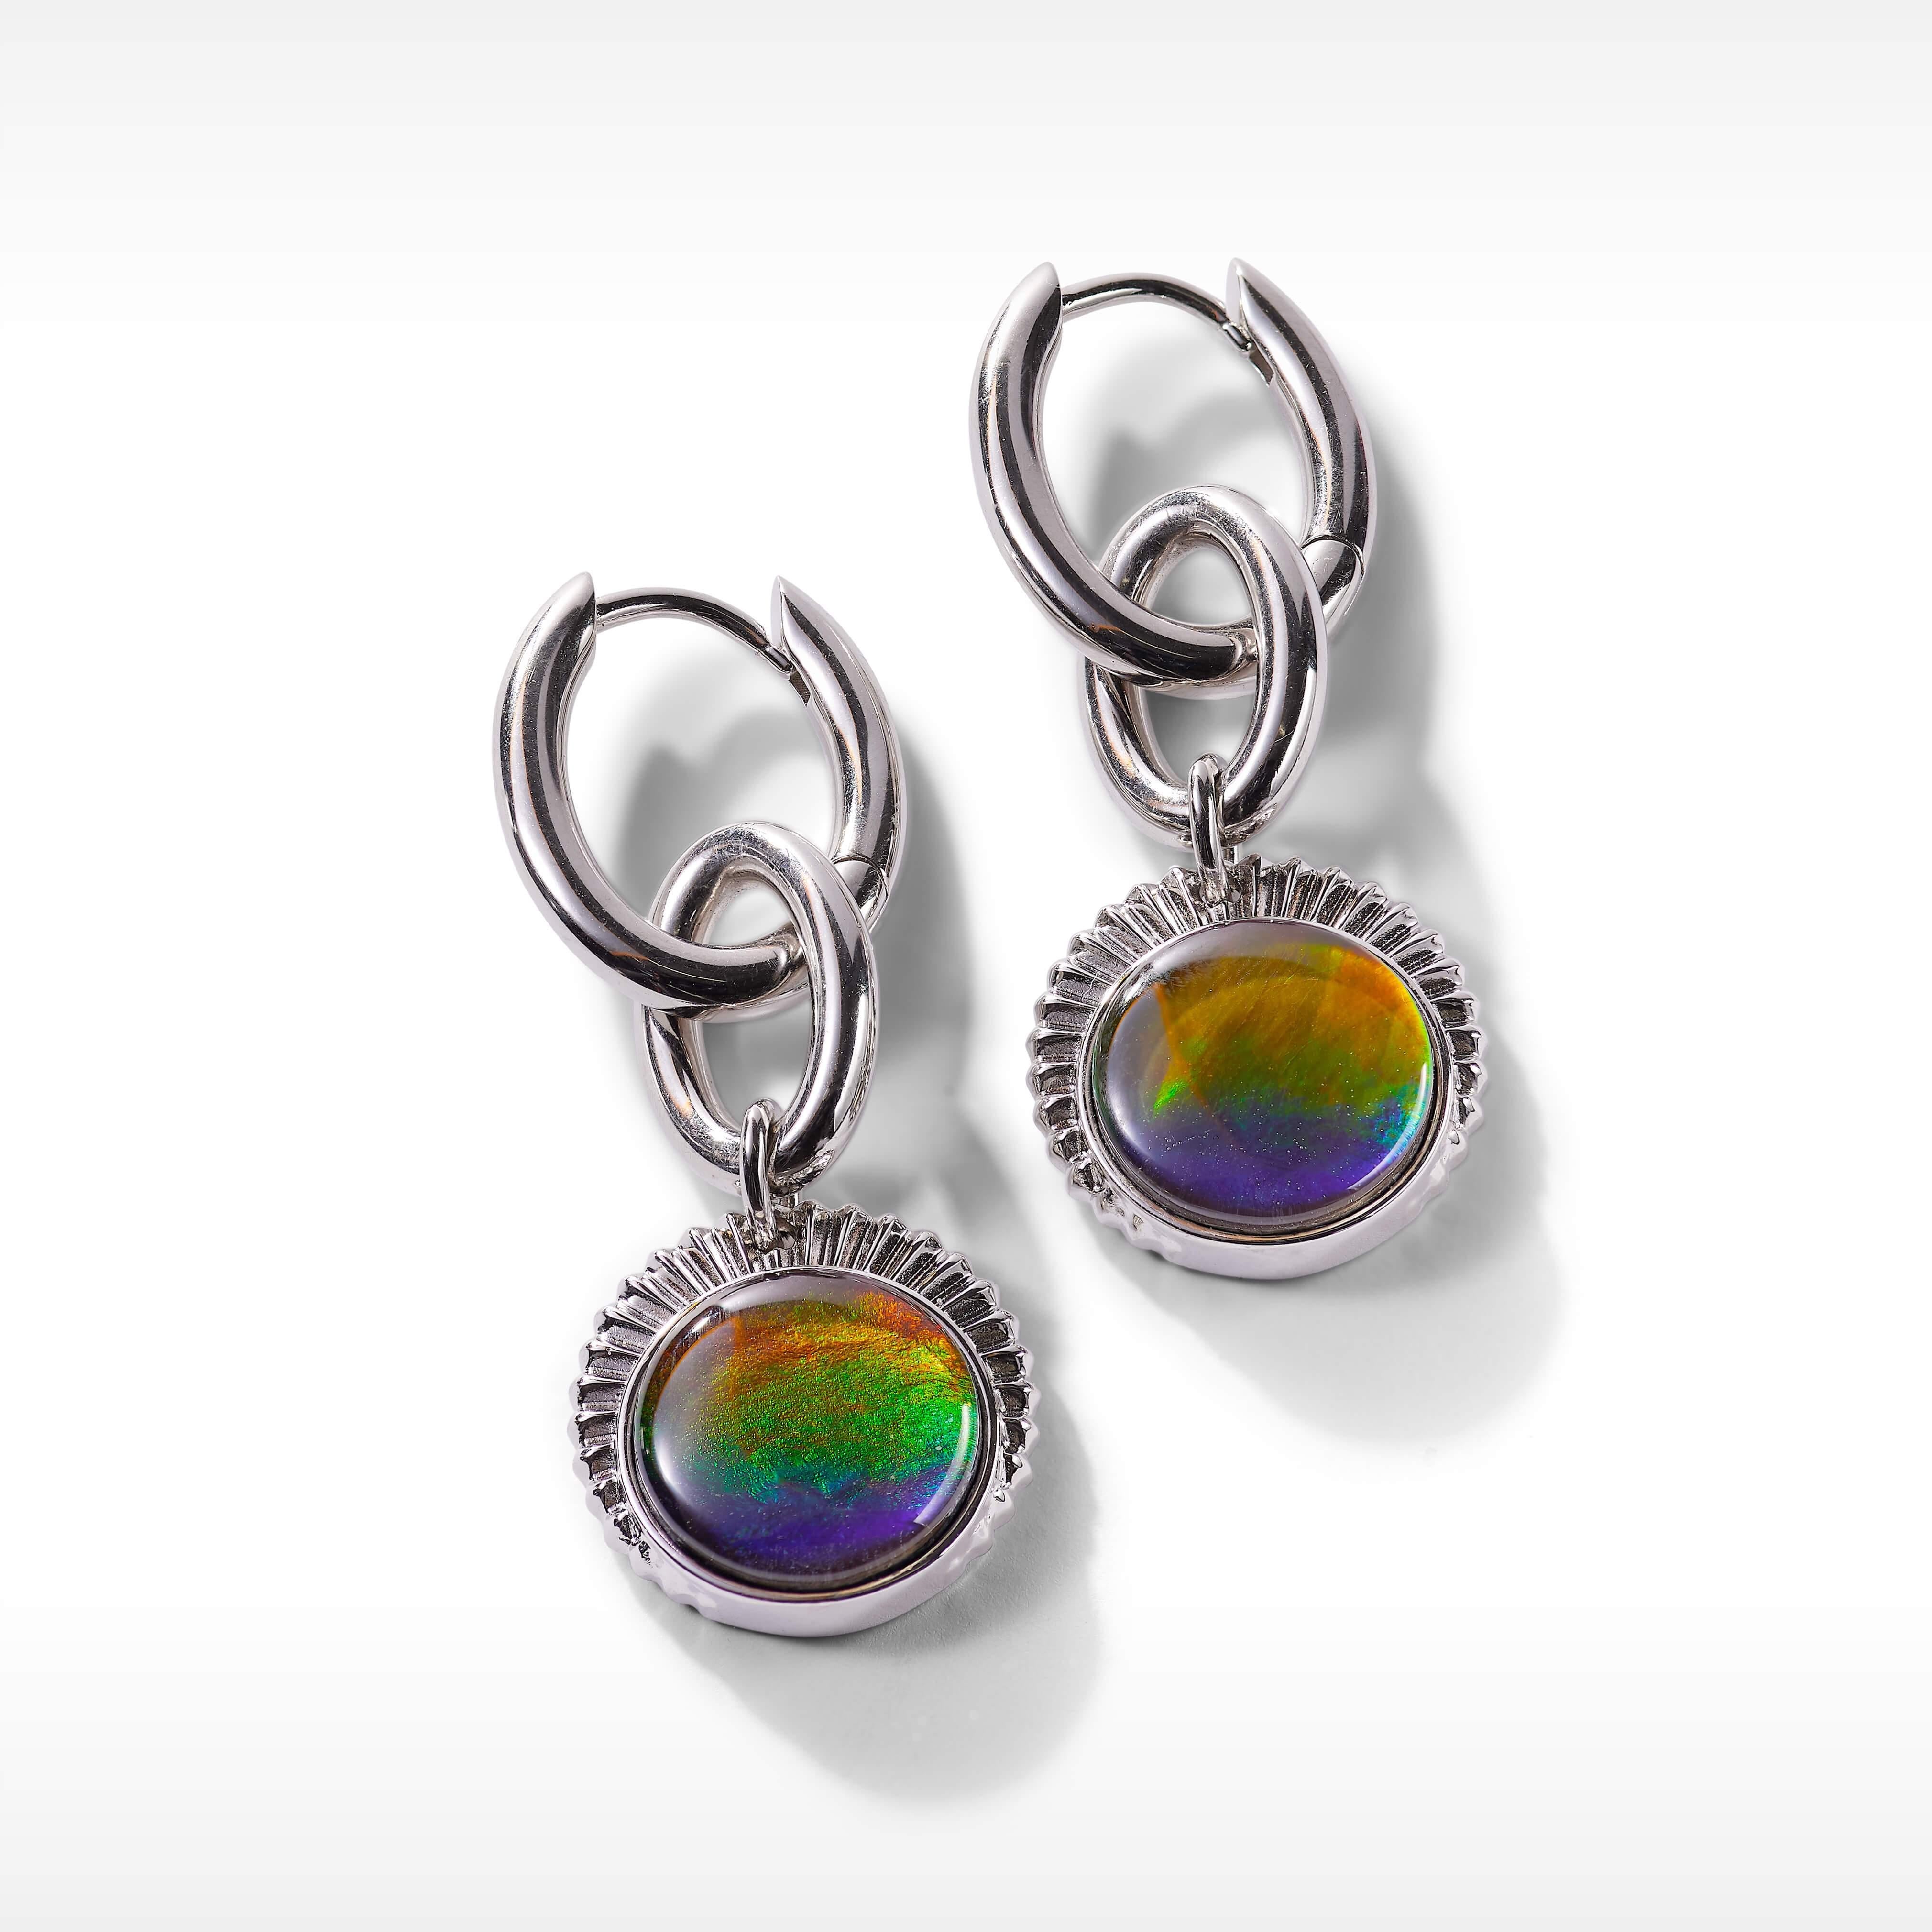 Product Details:

The Origins collection features bold Ammolite showpieces highlighting organic textures inspired by our ammonite roots.

A grade Ammolite
12mm round Ammolite chain link earrings
925 Sterling Silver
Charm dimensions: 16.3mm x